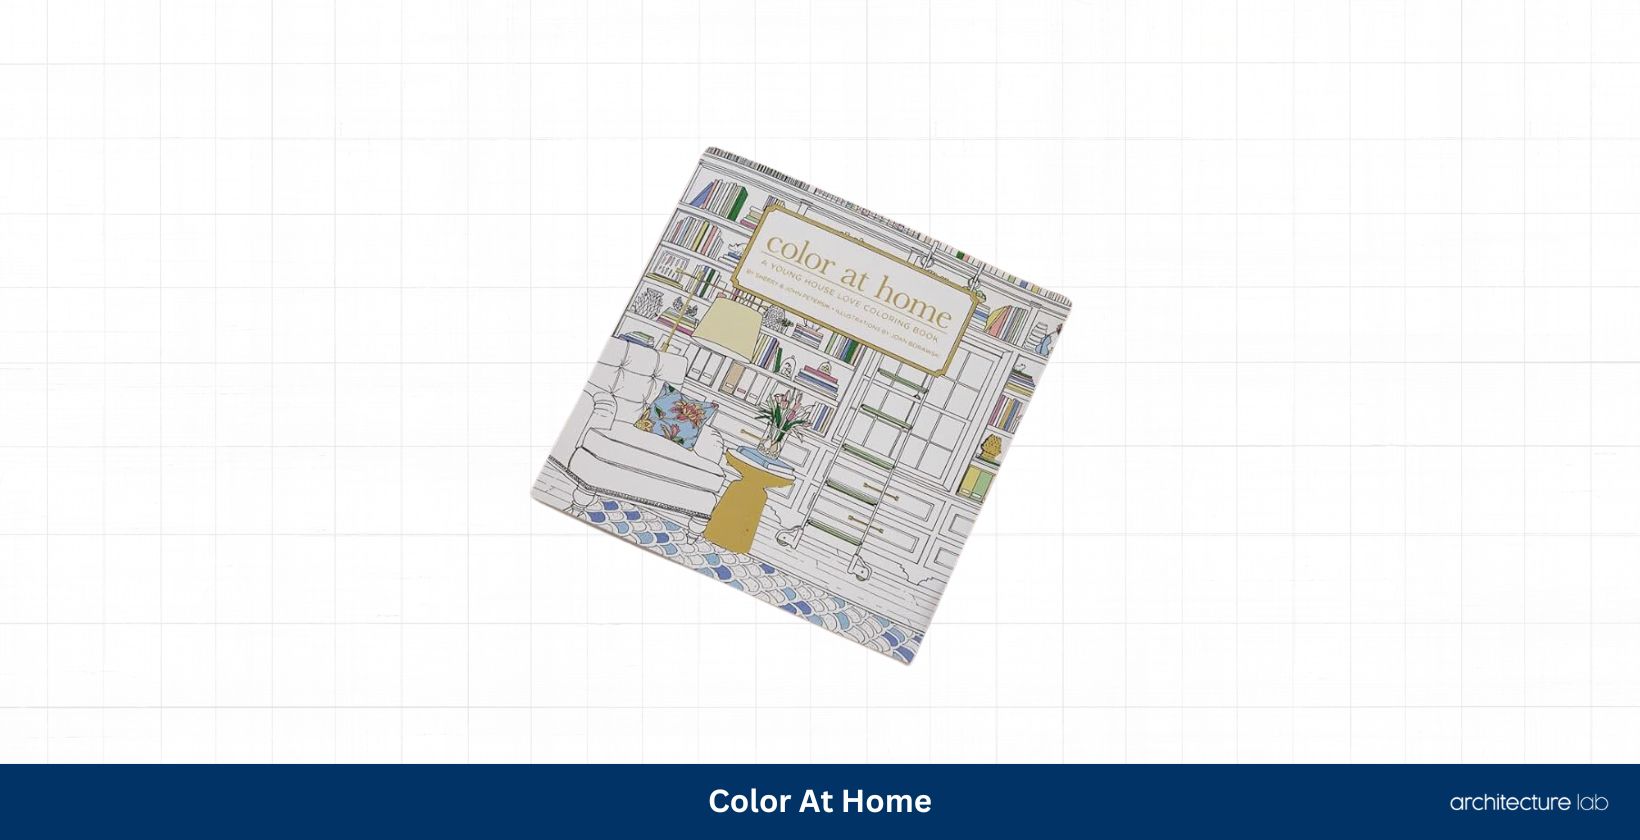 Color at home a young house love coloring book